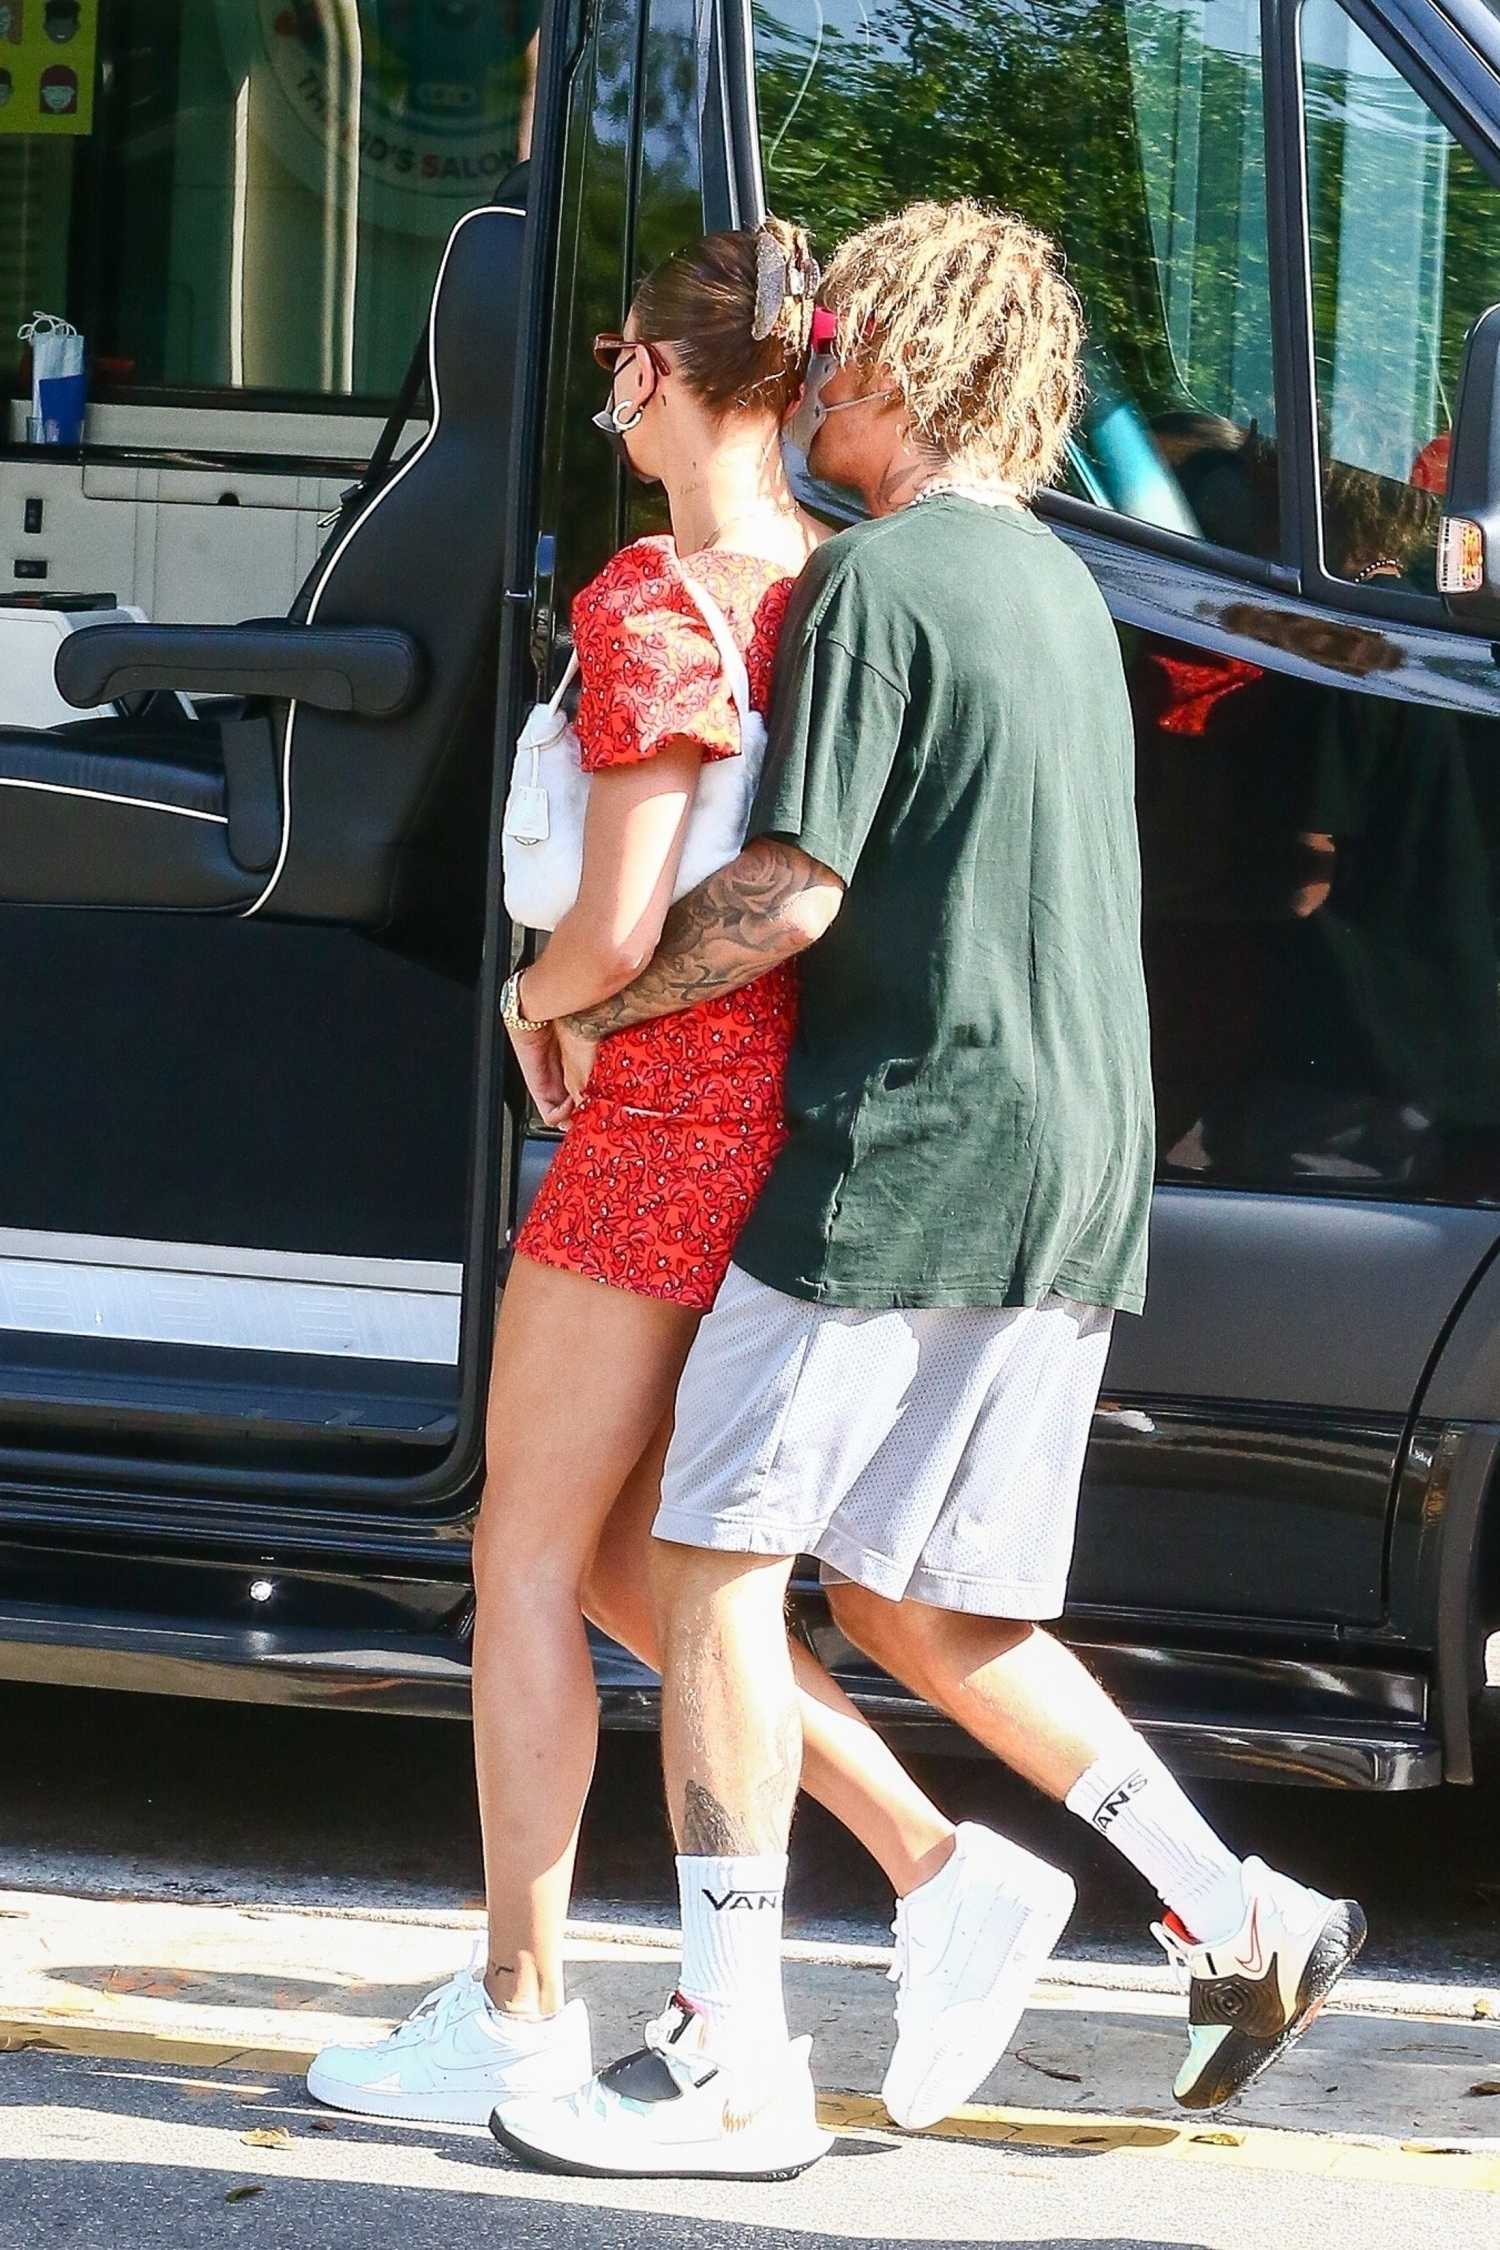 Hailey Bieber In A Red Mini Dress Was Seen Out With Justin Bieber In